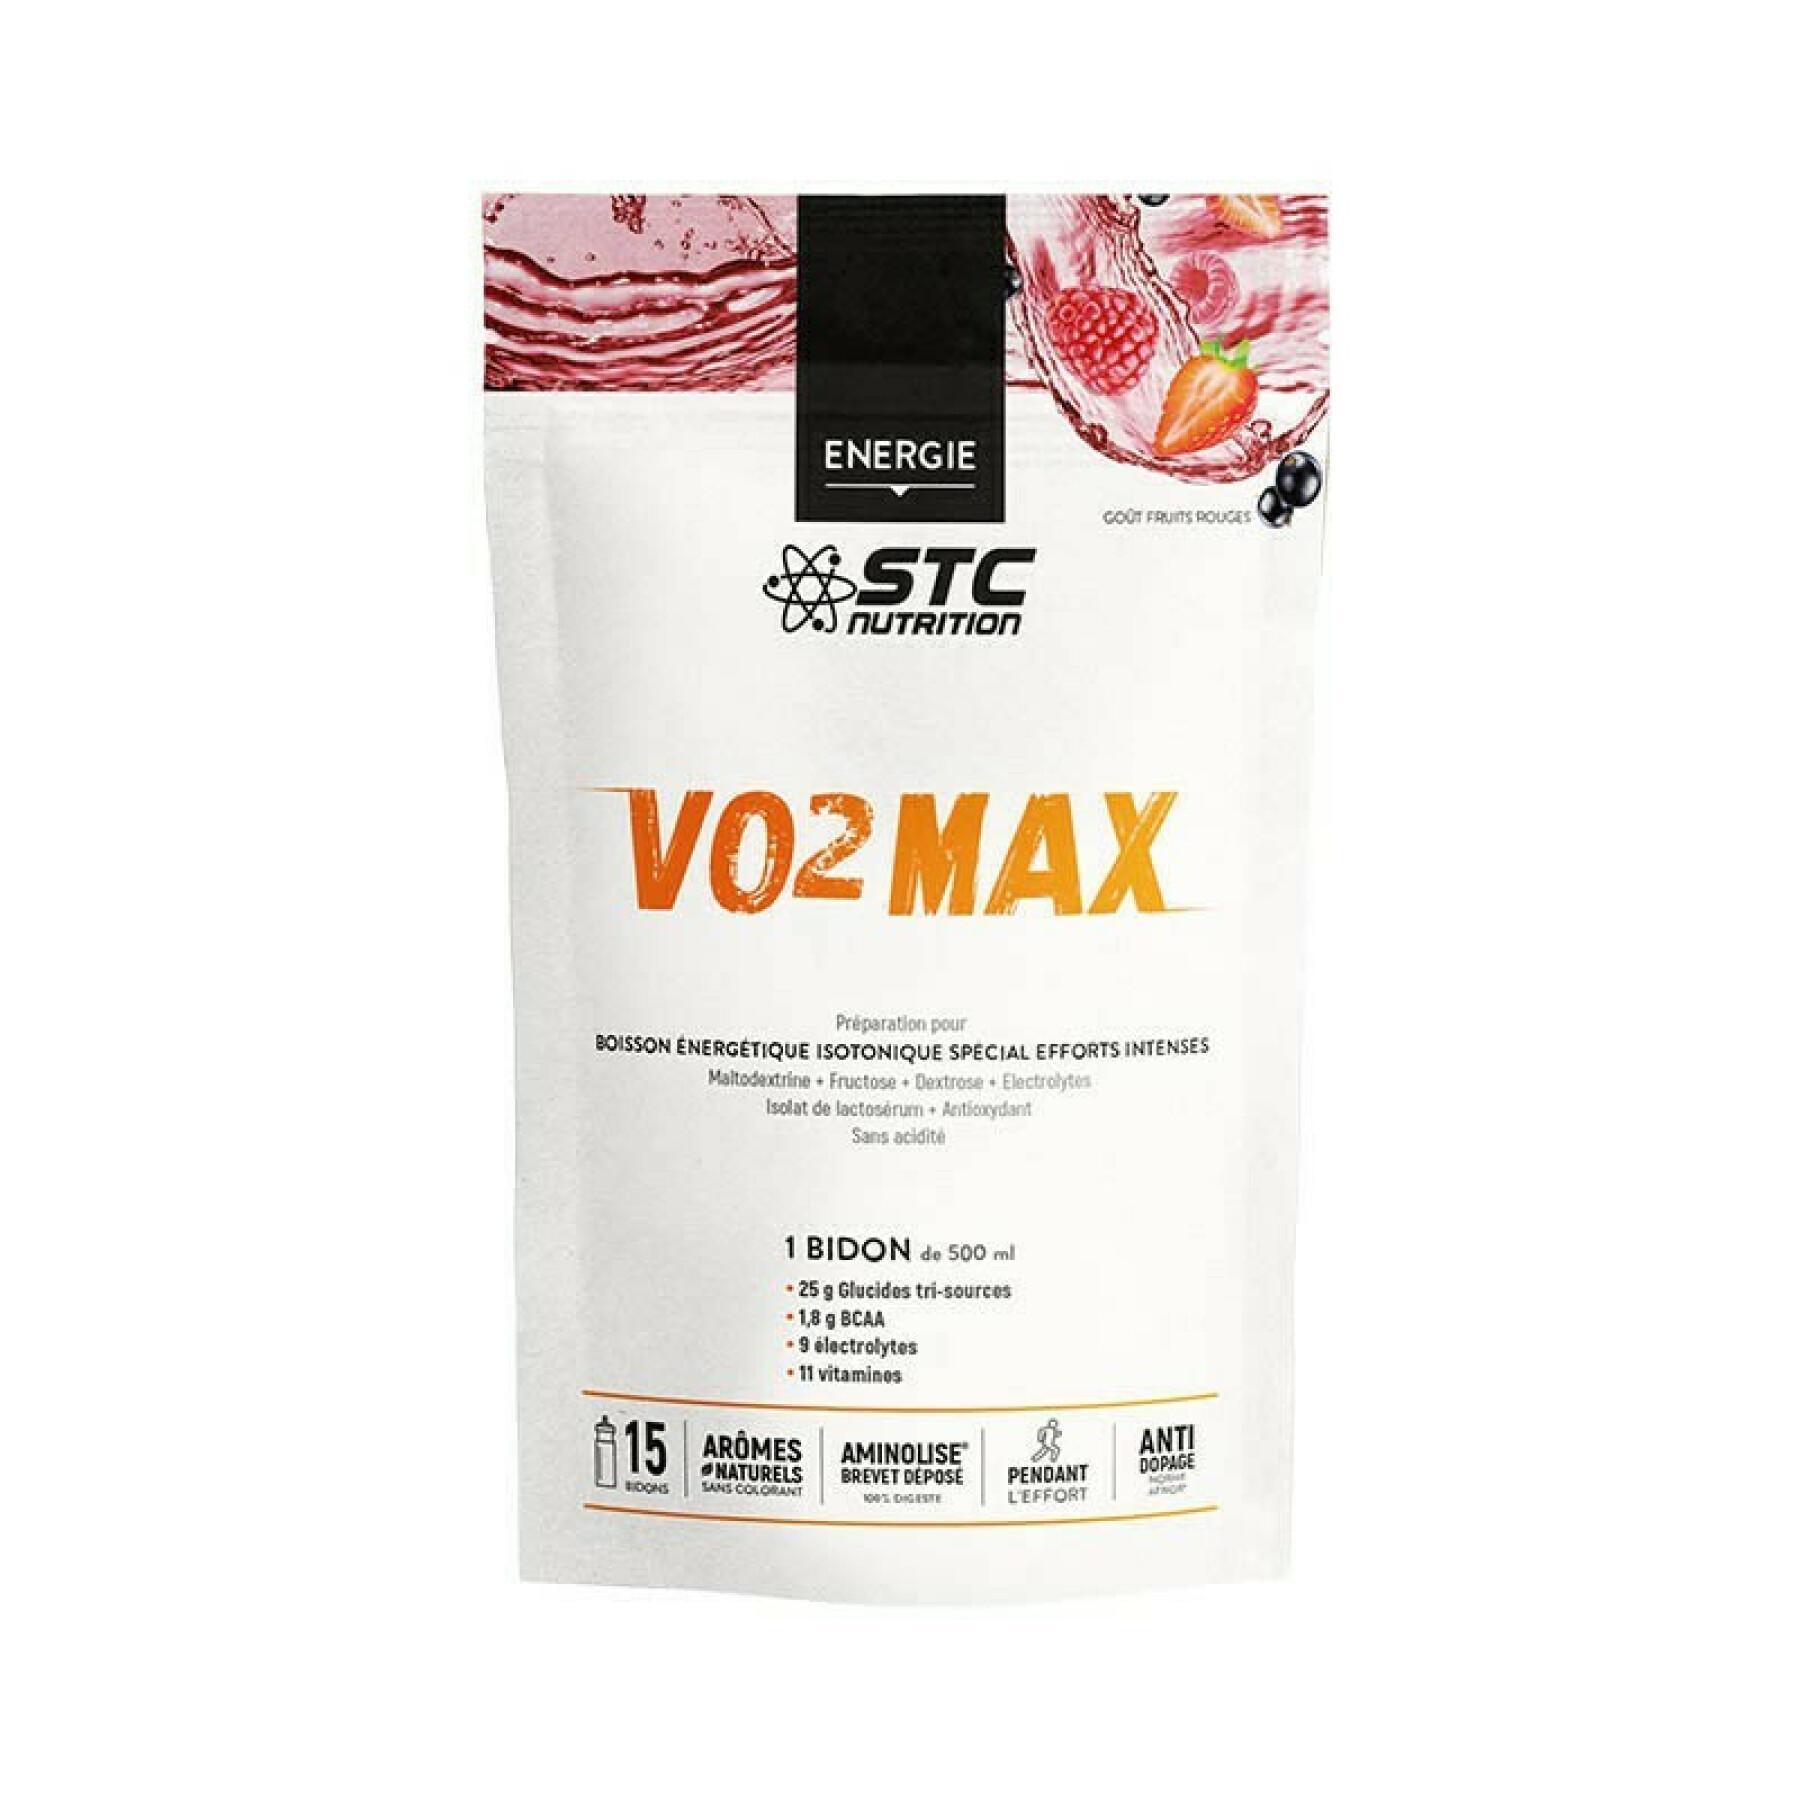 Doypack nutrition vo2 max® con misurino STC Nutrition - fruits rouges - 525 g